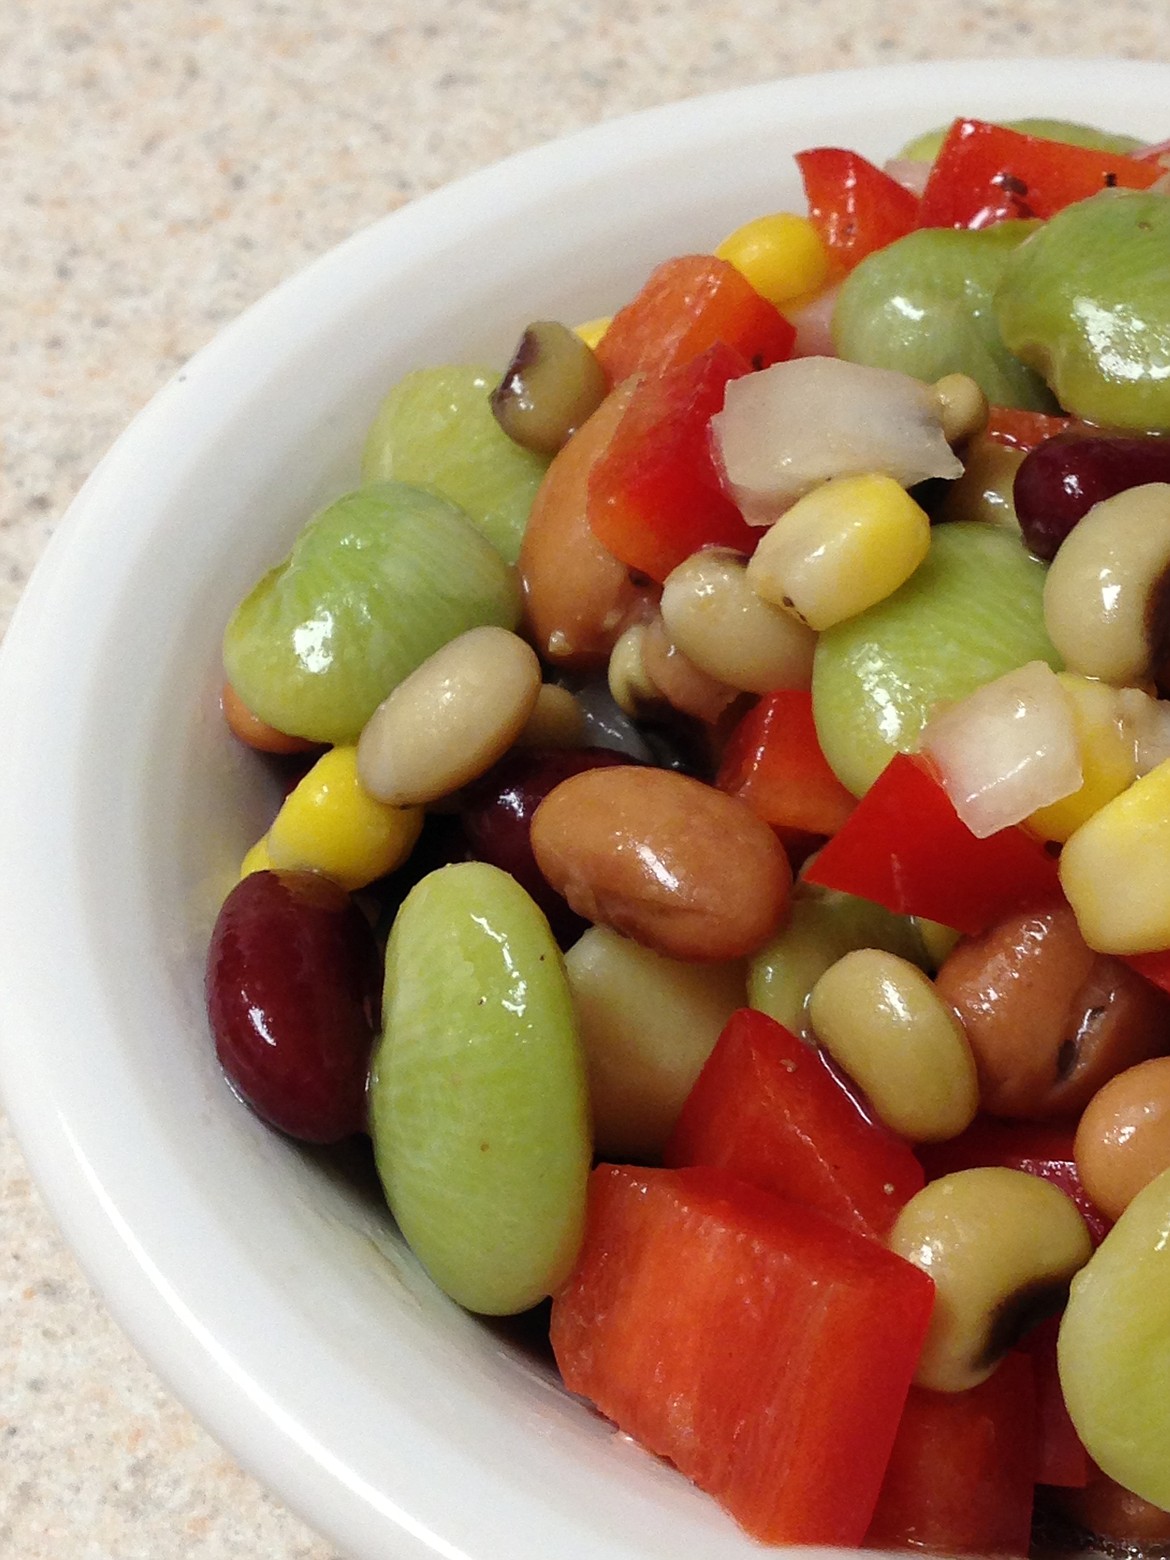 Native Americans’ combination of beans with corn forms a complete protein, making for the perfect marriage of health and savor.